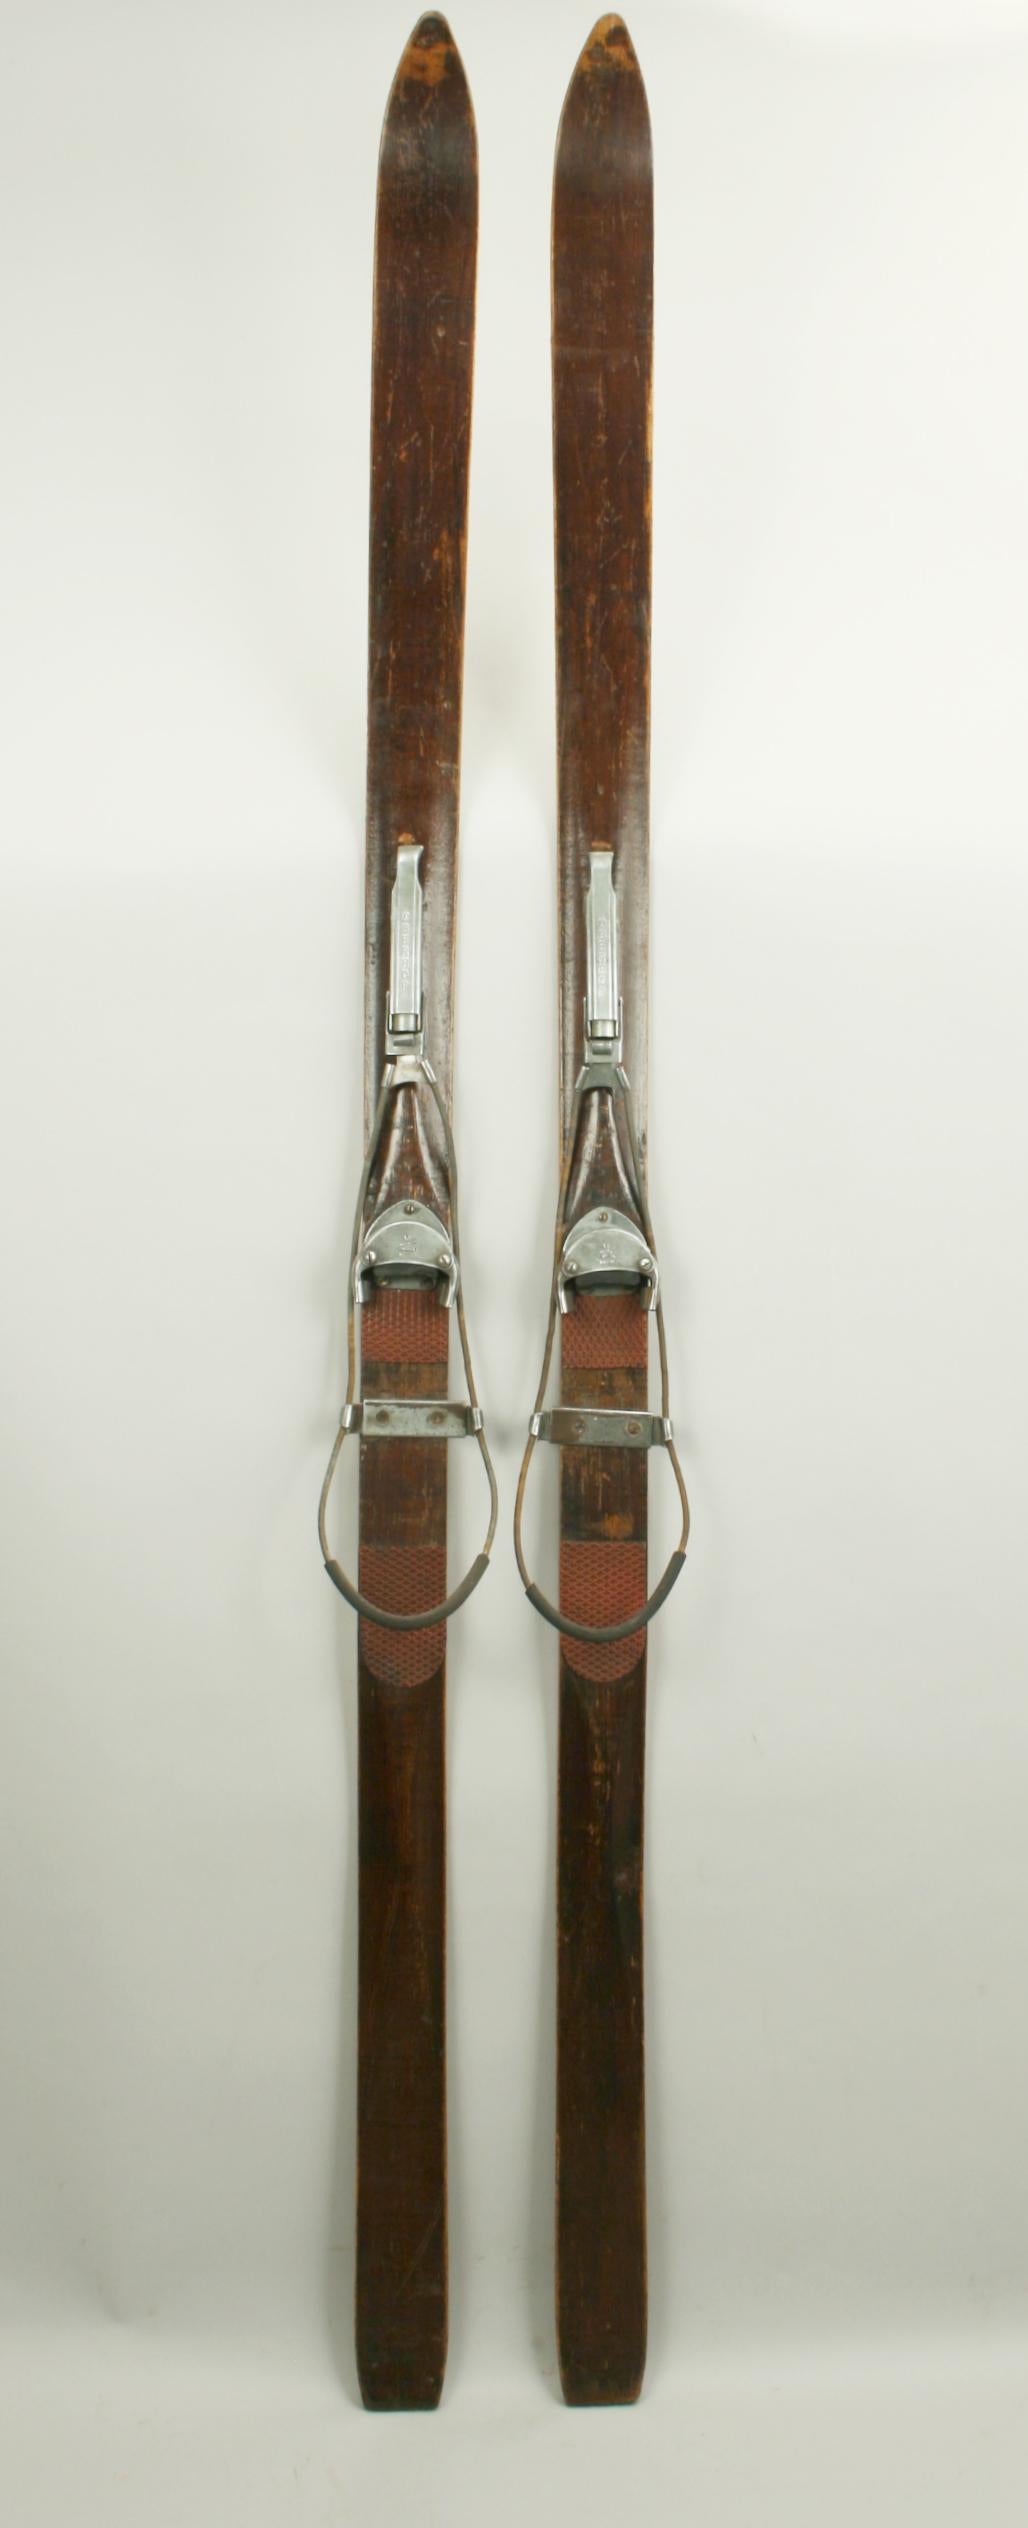 Antique Ash Skis with Unique Oberhof Safety Bindings, Museum Piece 1